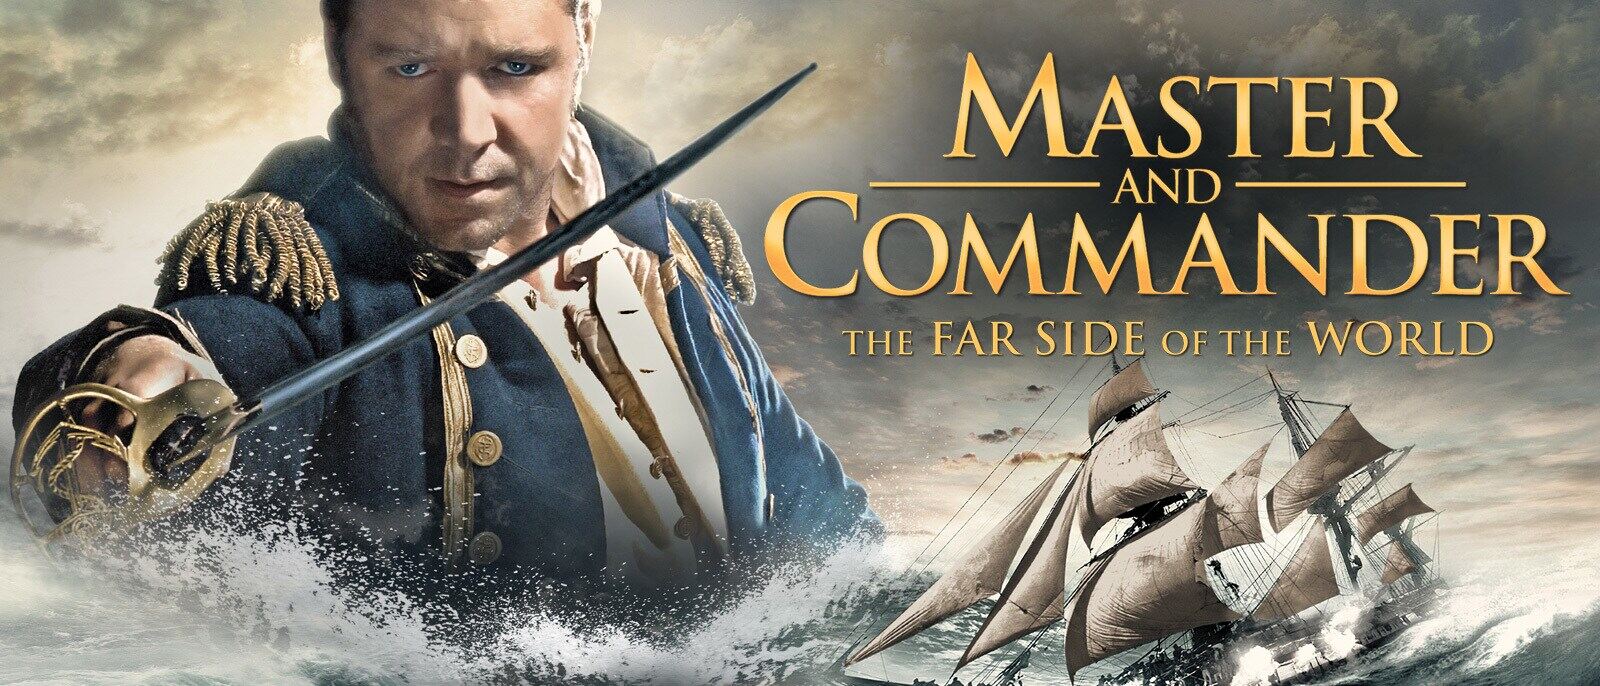 44-facts-about-the-movie-master-and-commander-the-far-side-of-the-world